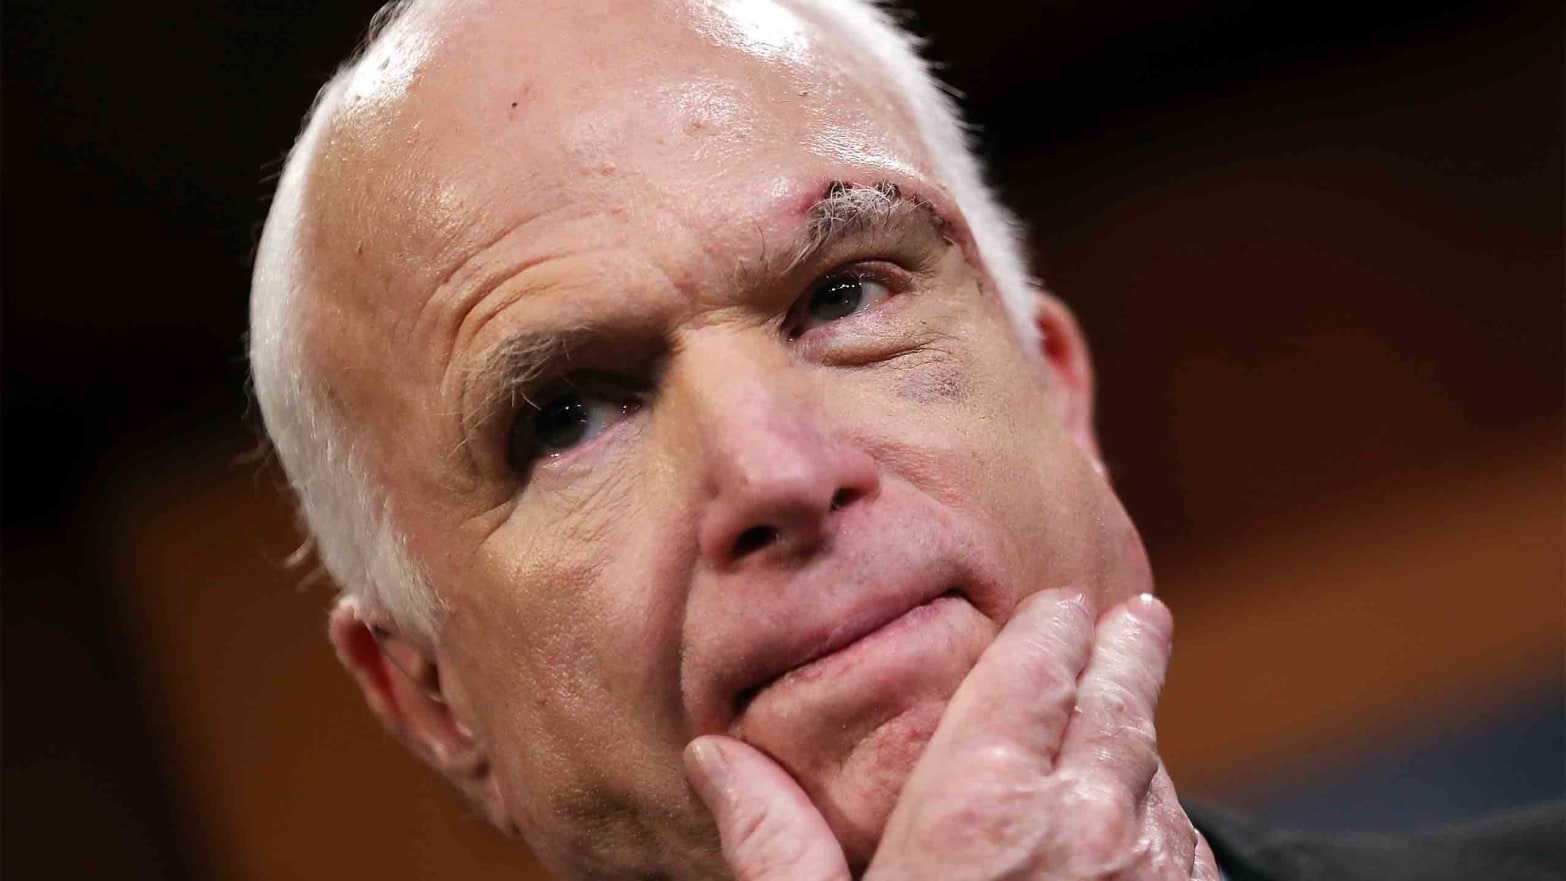 Senator John McCain Just Effectively Killed the Republican Party’s Latest Health Care Bill